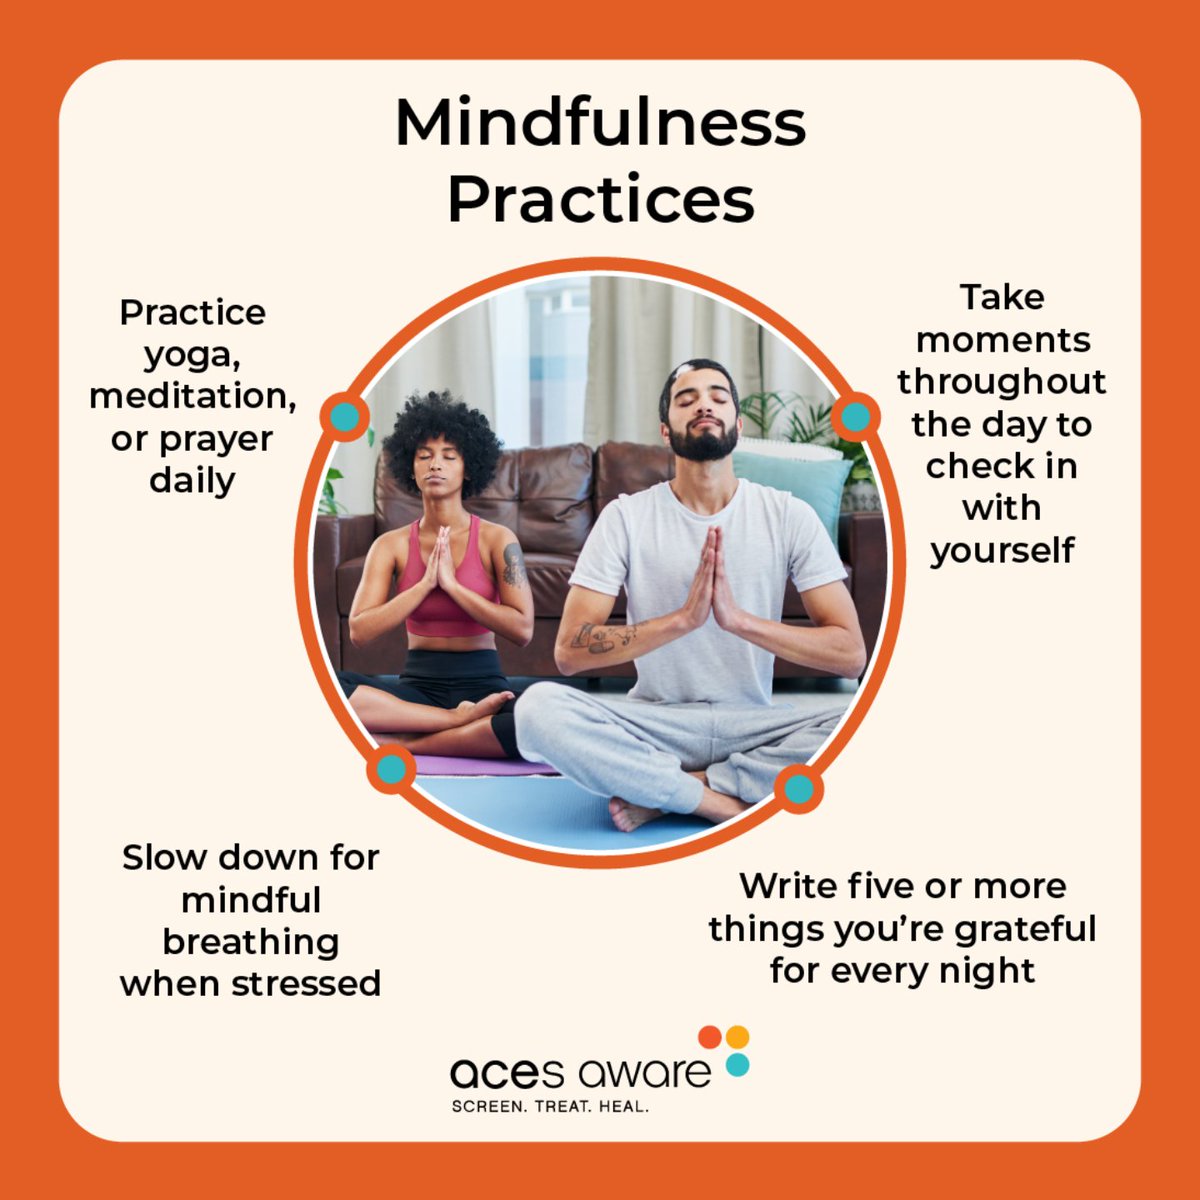 Being present in the moment can help us find better ways to take care of ourselves, allowing us to listen to our minds and bodies to lower stress. This #NationalSelfCareDay, learn more ways to manage stress at acesaware.org/managestress/m…